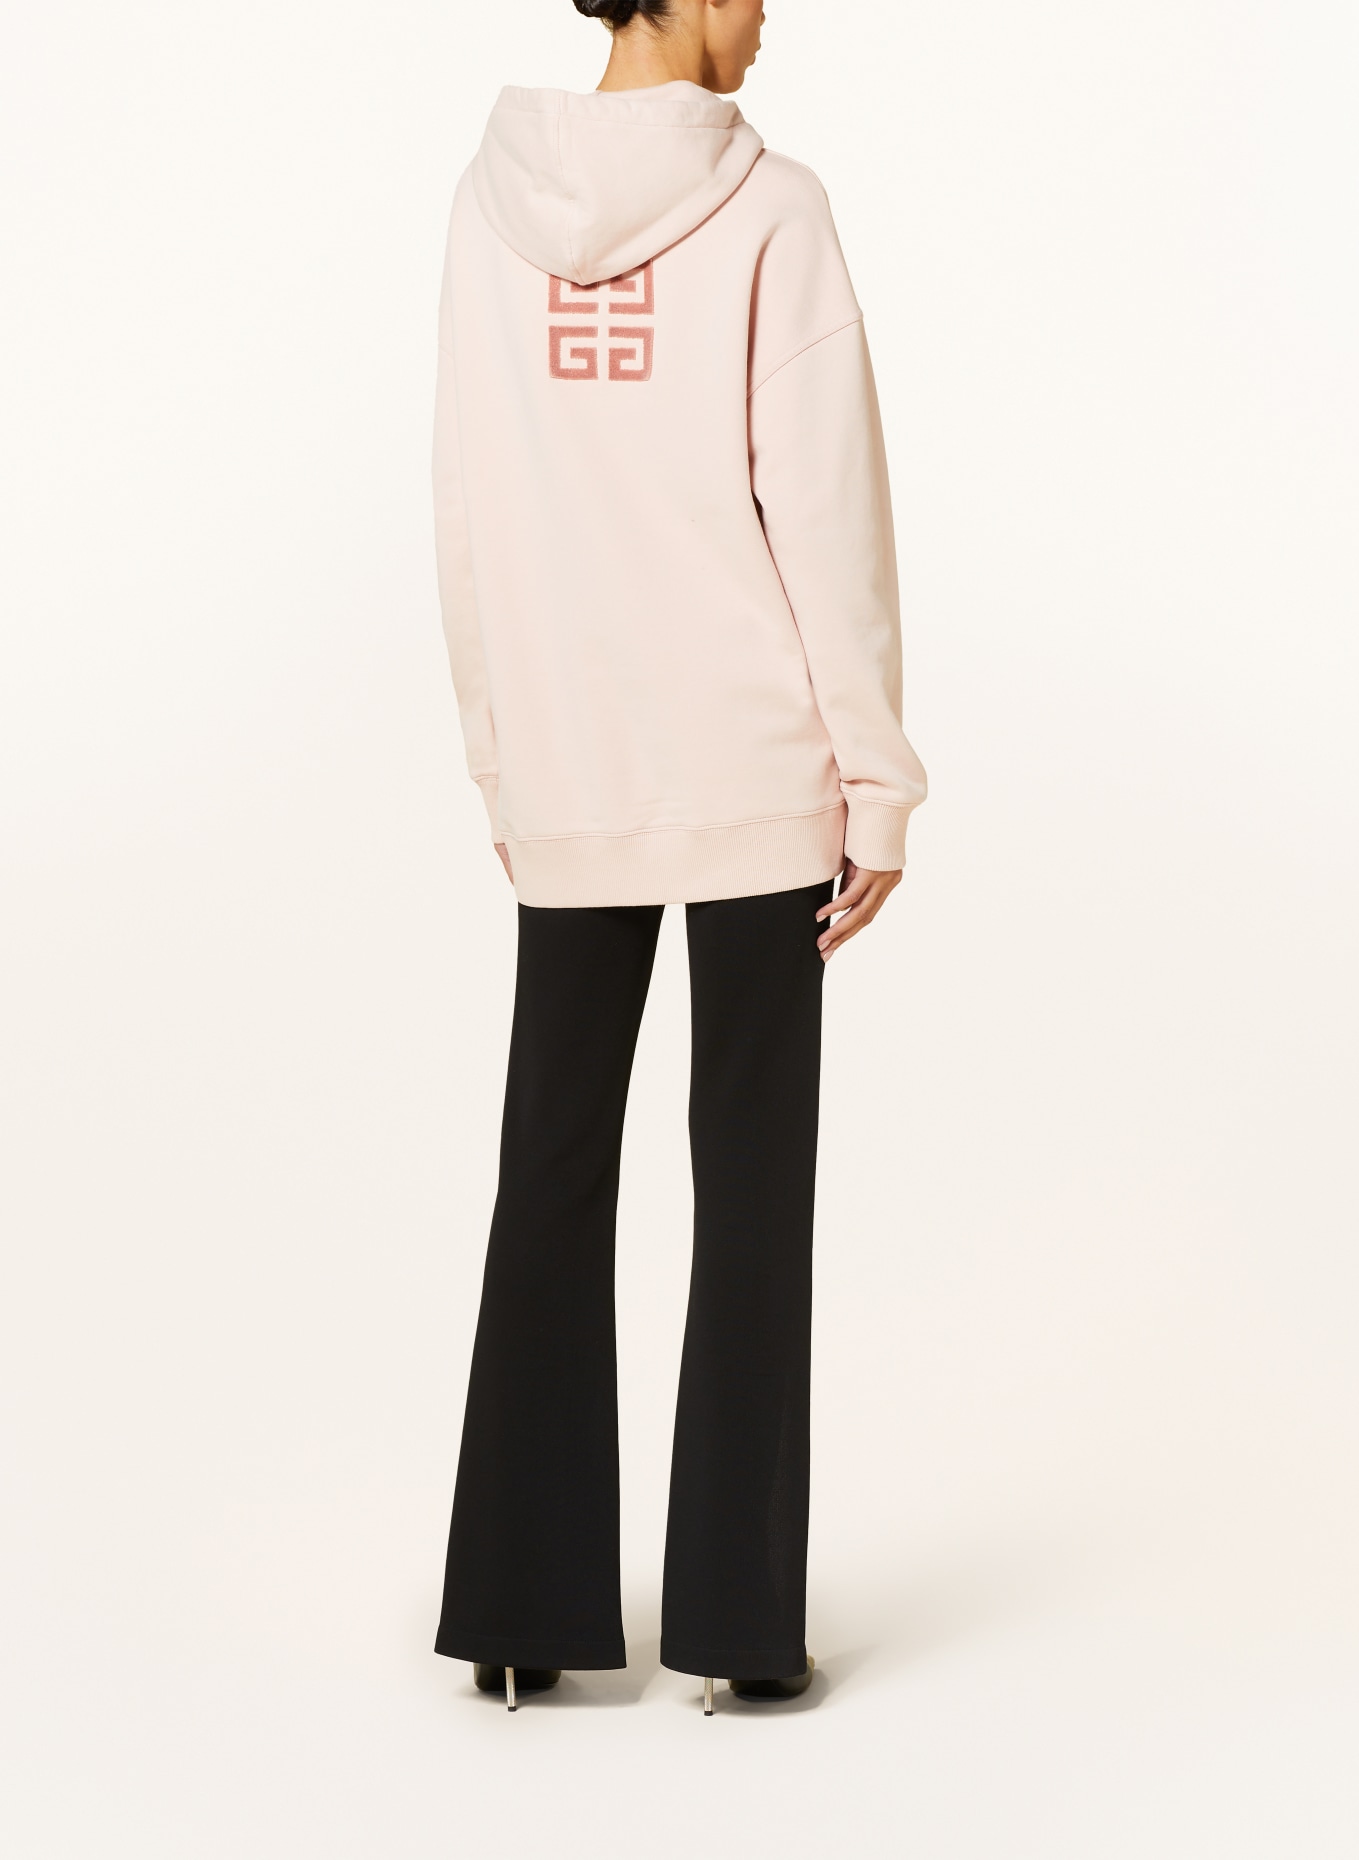 GIVENCHY Oversized hoodie, Color: LIGHT PINK (Image 3)